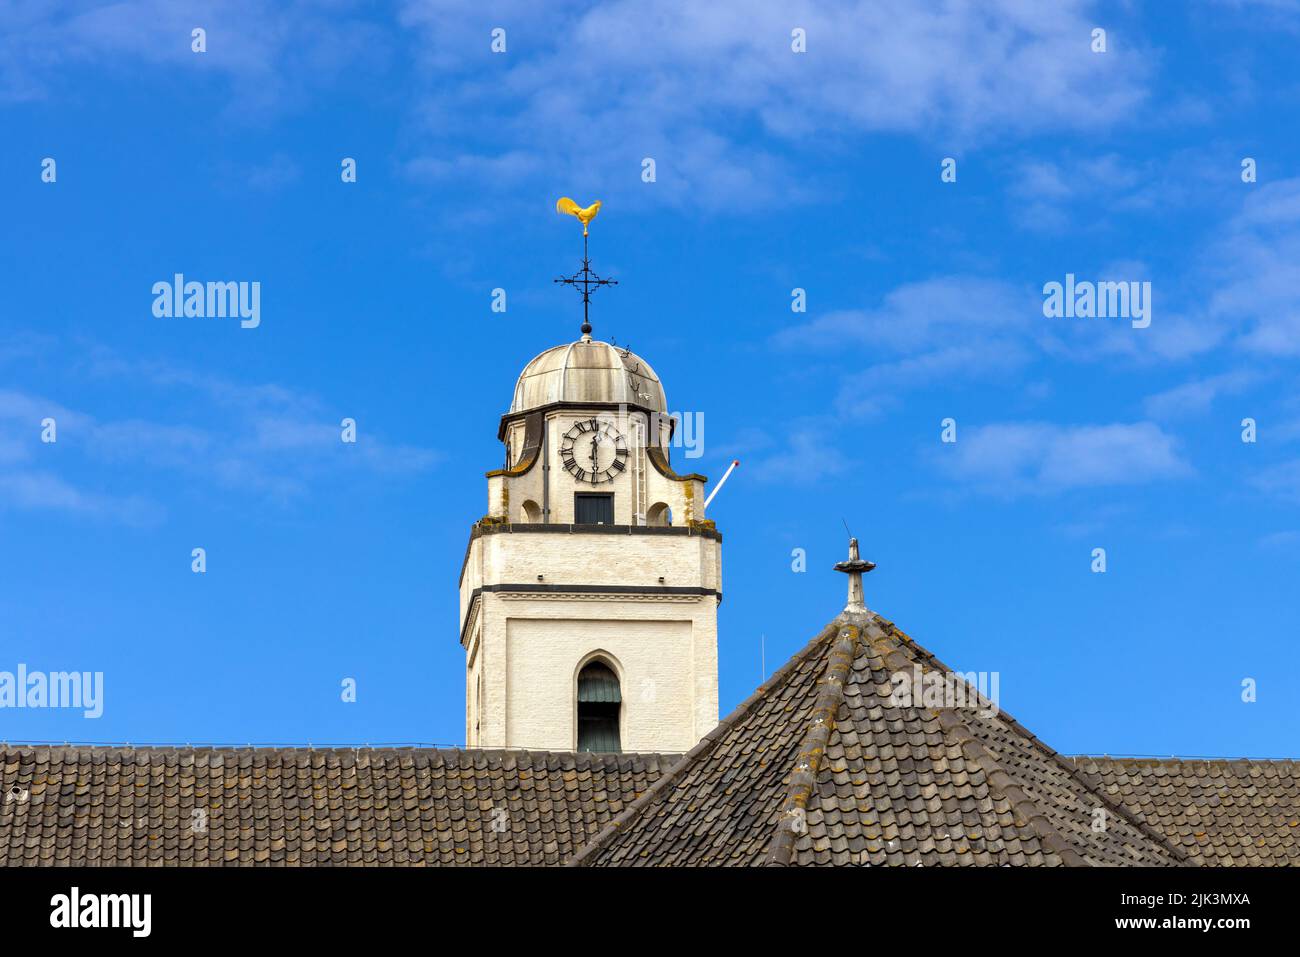 Close-up of the lock tower with weather vane of  Andreaskerk (Andrew's Church), a famous landmark in Katwijk aan Zee, South Holland, The Netherlands. Stock Photo